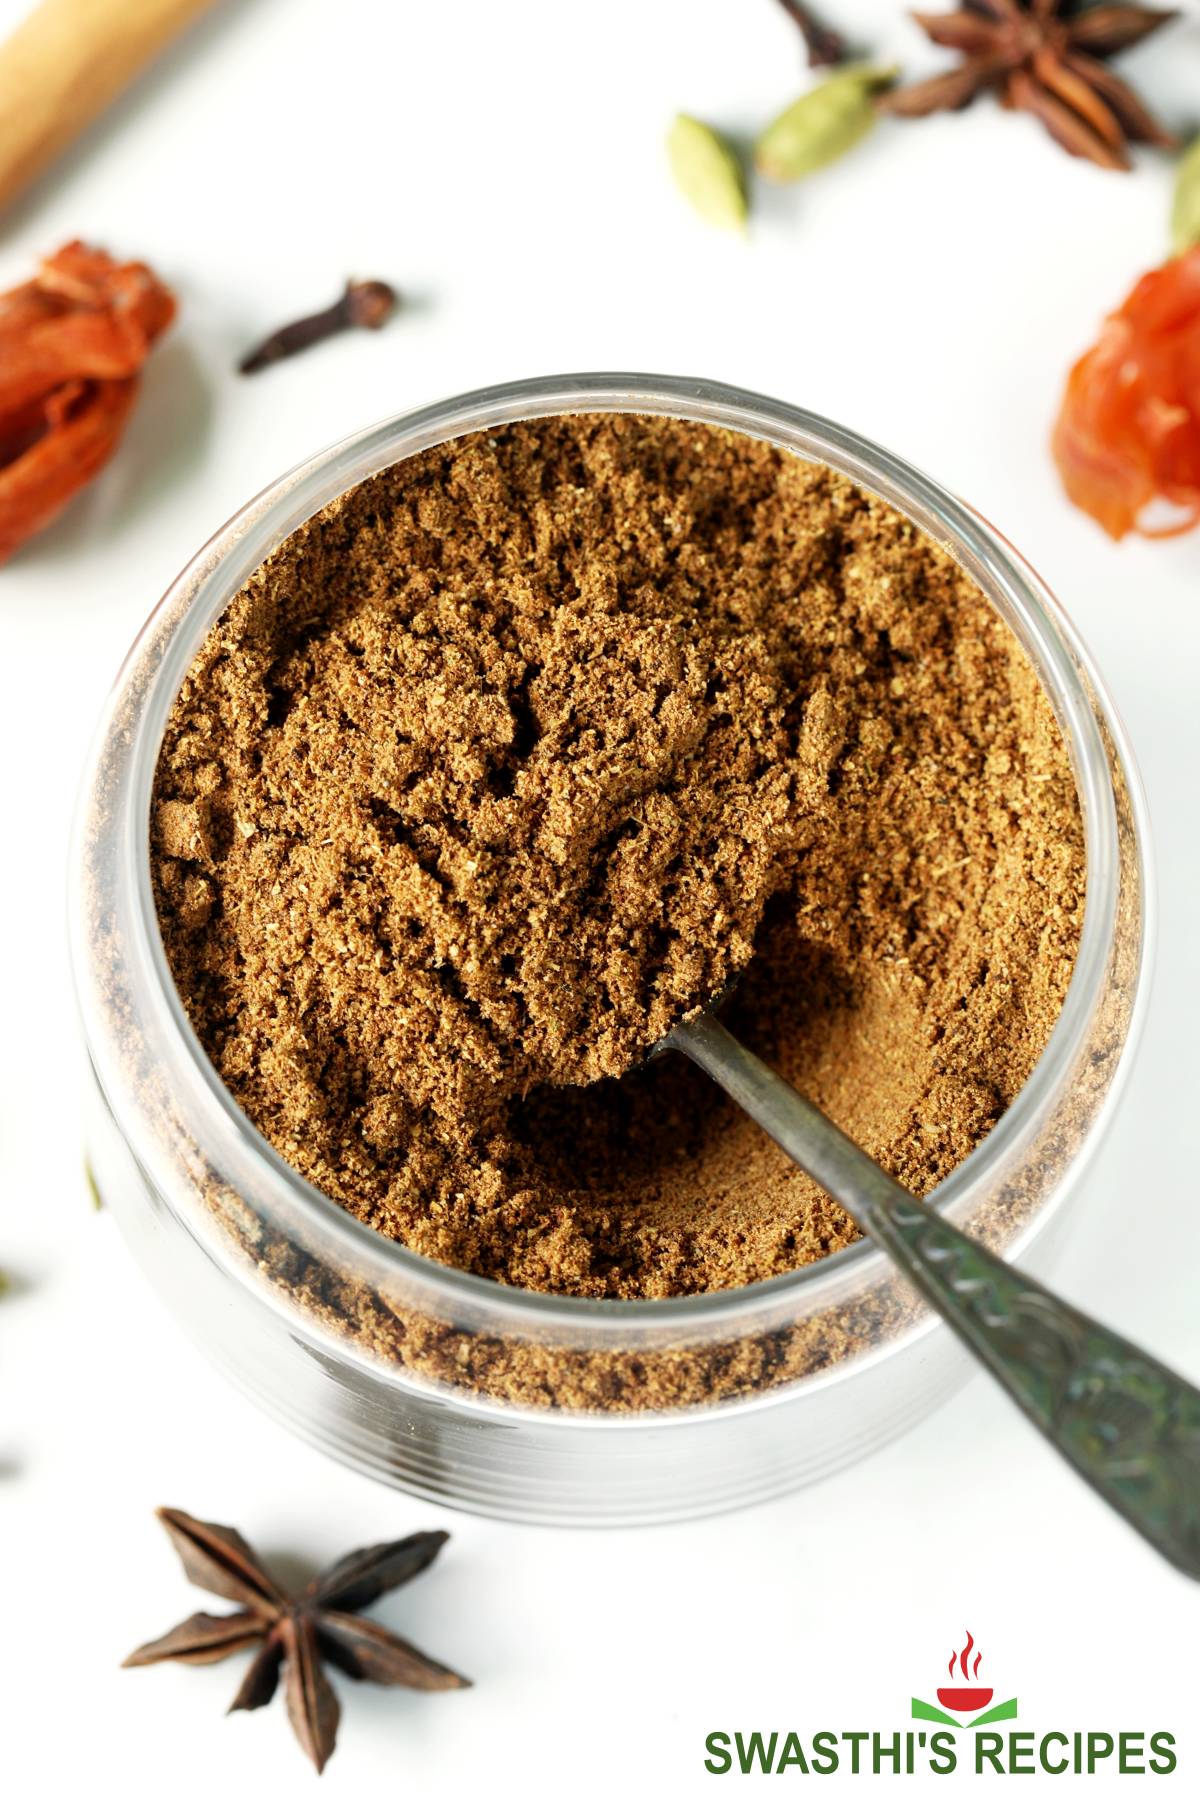 Toasting & Grinding Spices Recipe - The Spice House